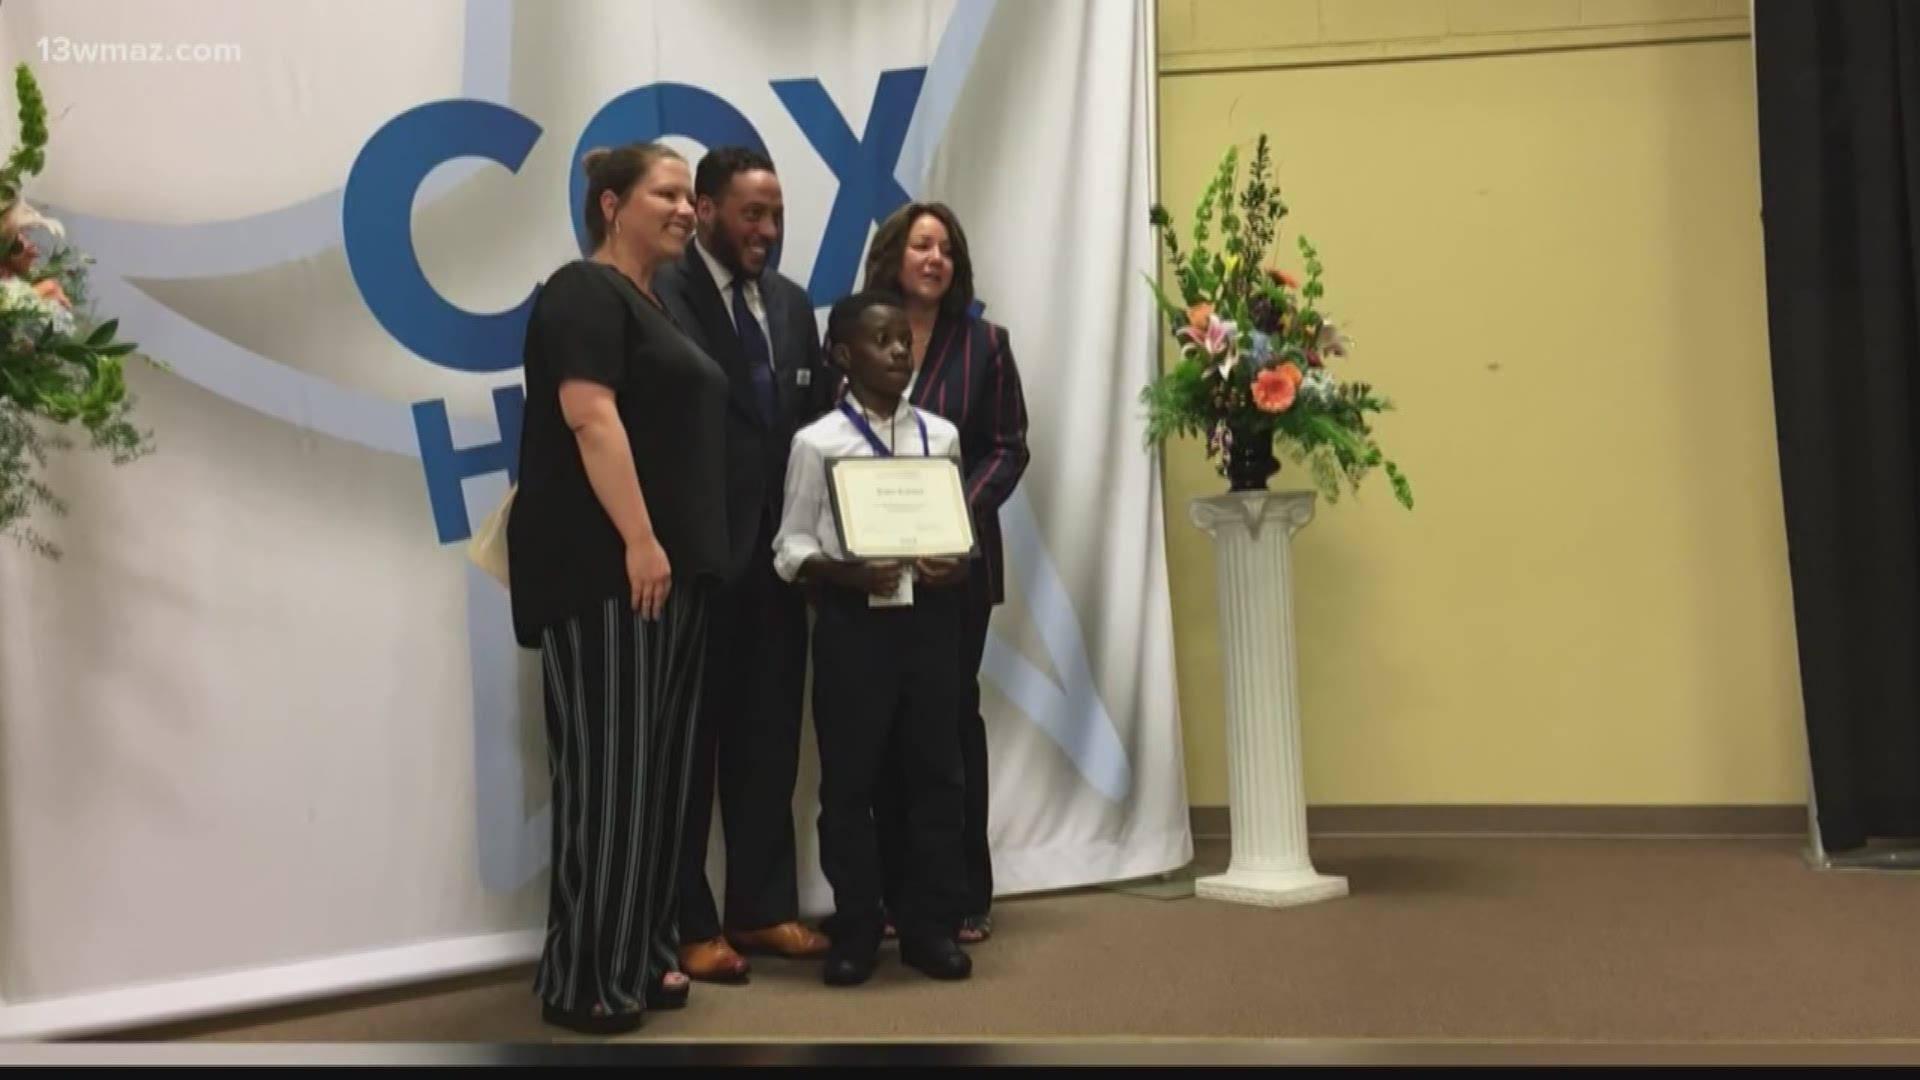 Some students face challenges but overcome them against all odds. Monday night, Cox honored some inspirational students excelling in the Bibb County School District.